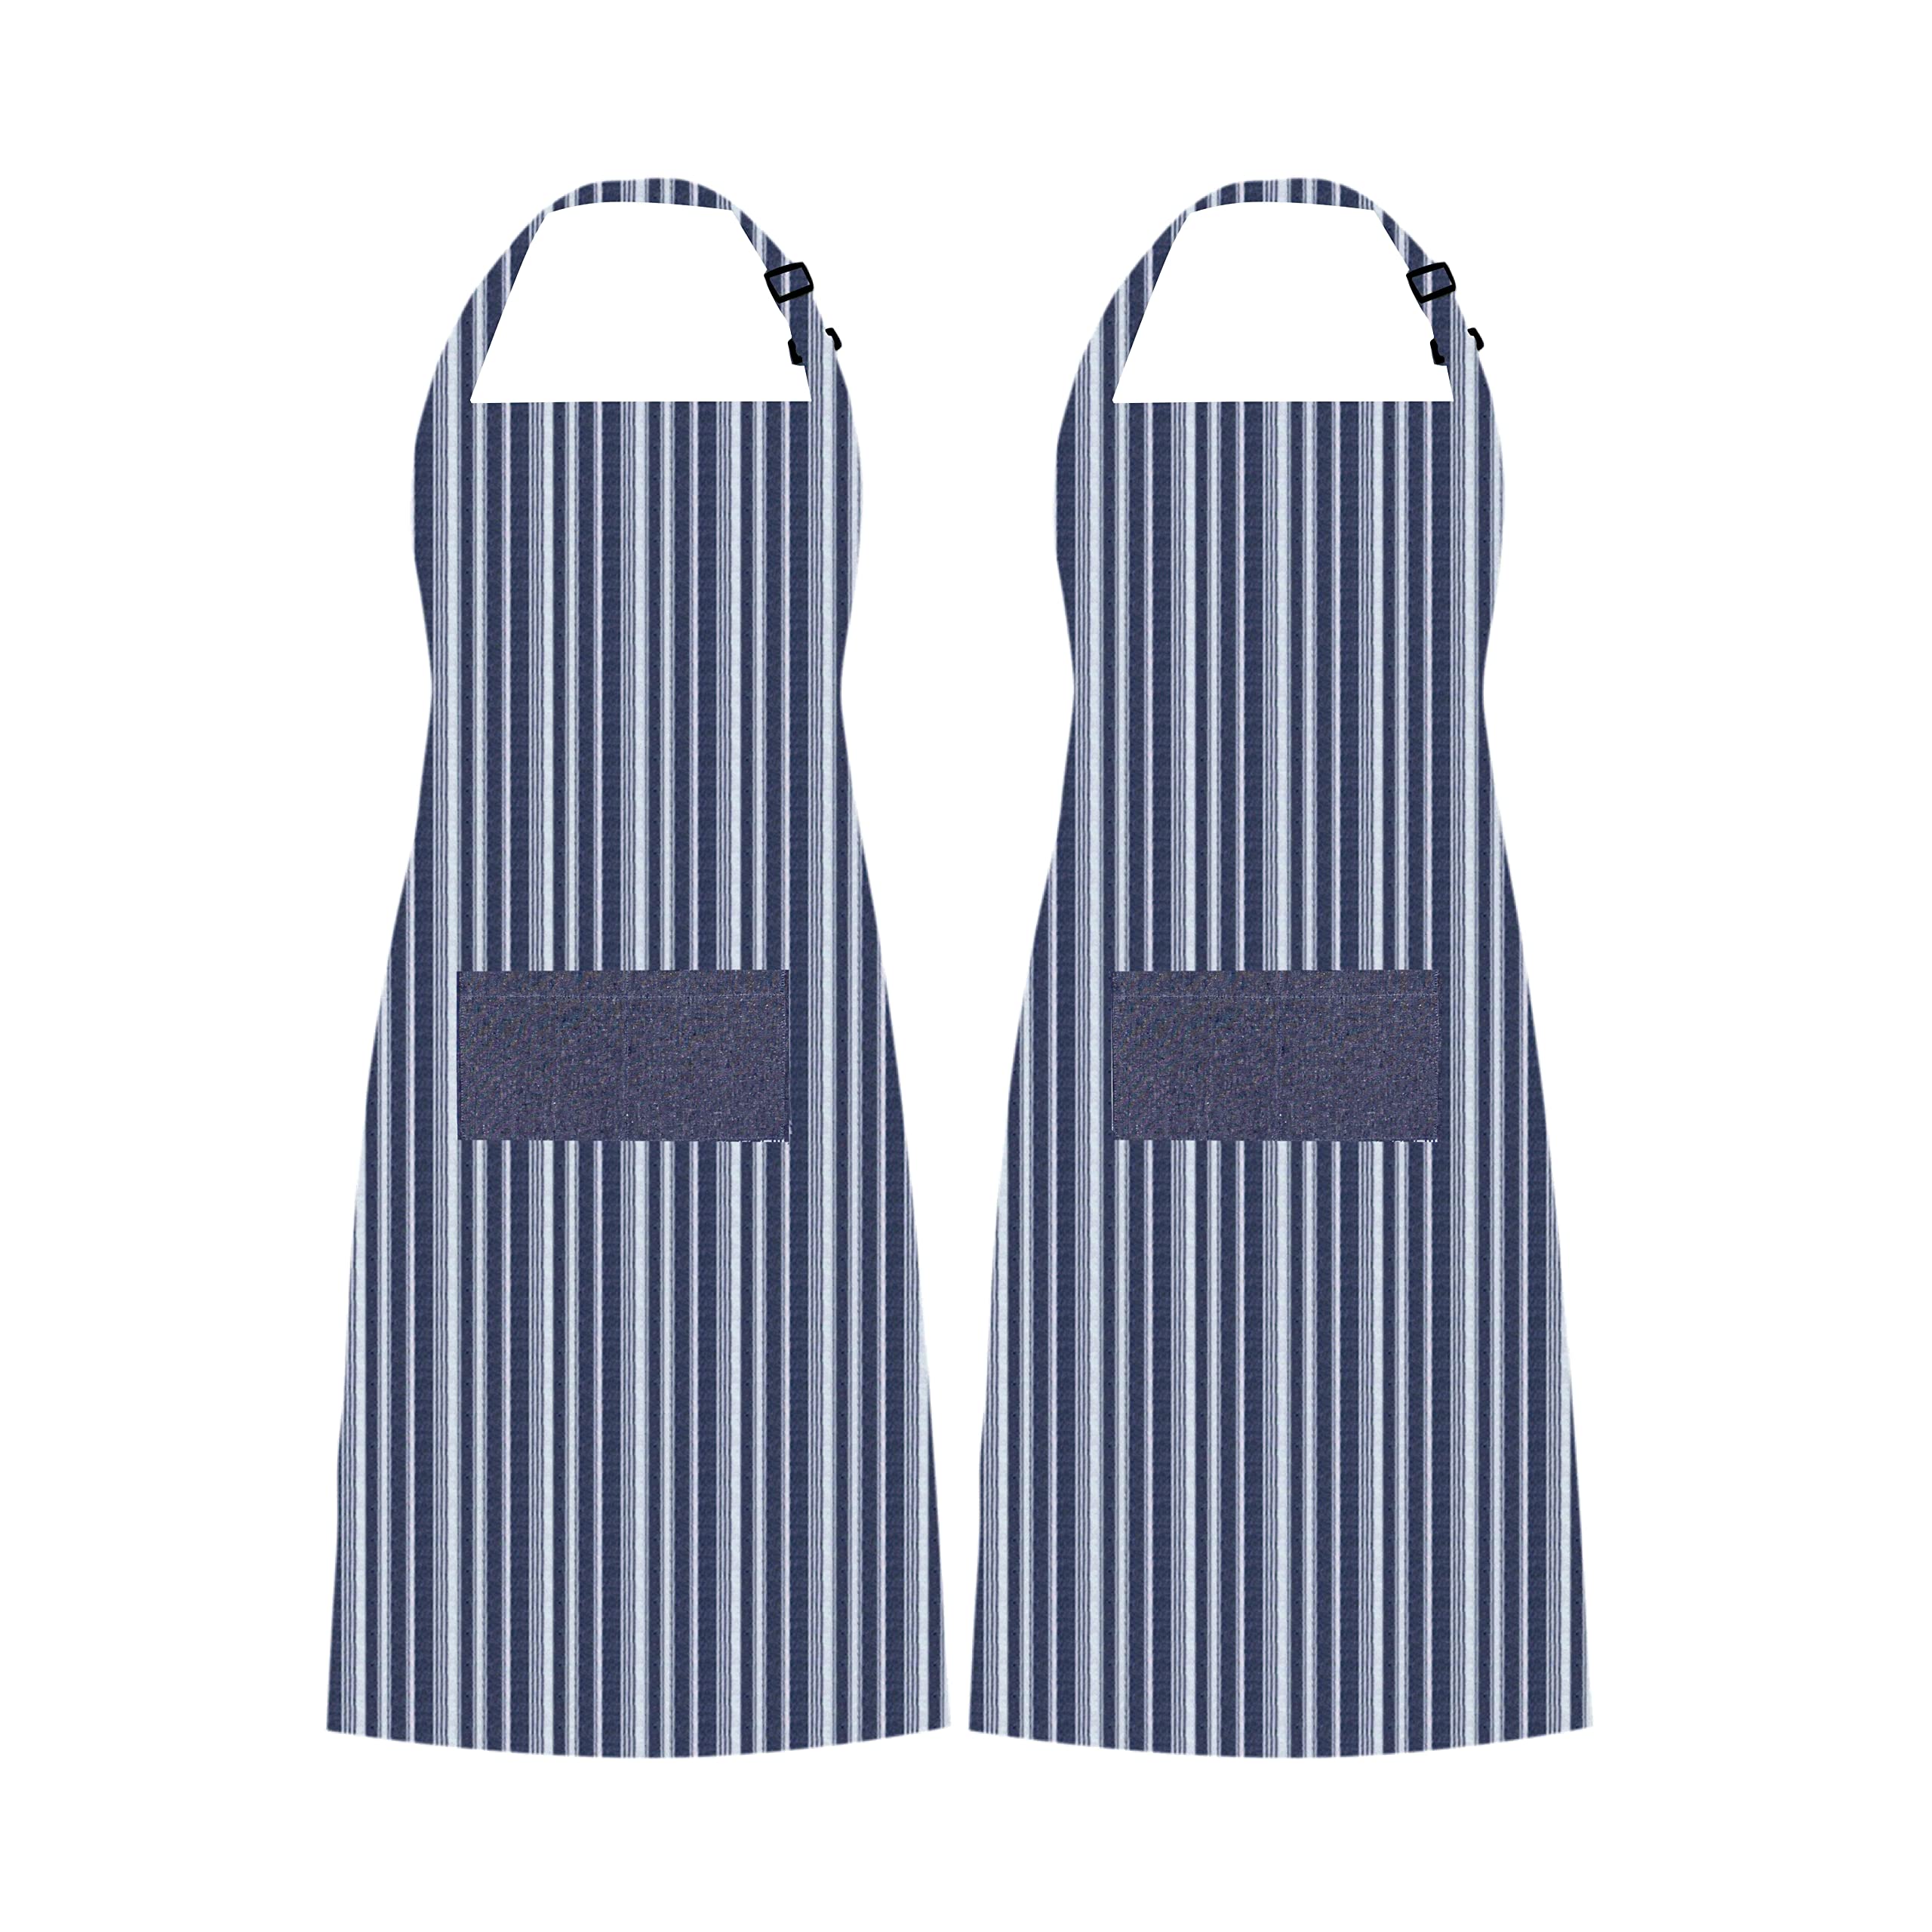 Kitchen Apron |Chef Apron with 2 pockets|Cotton Bib Apron with Adjustable Straps| Restaurant,Embroidery Craft Painting